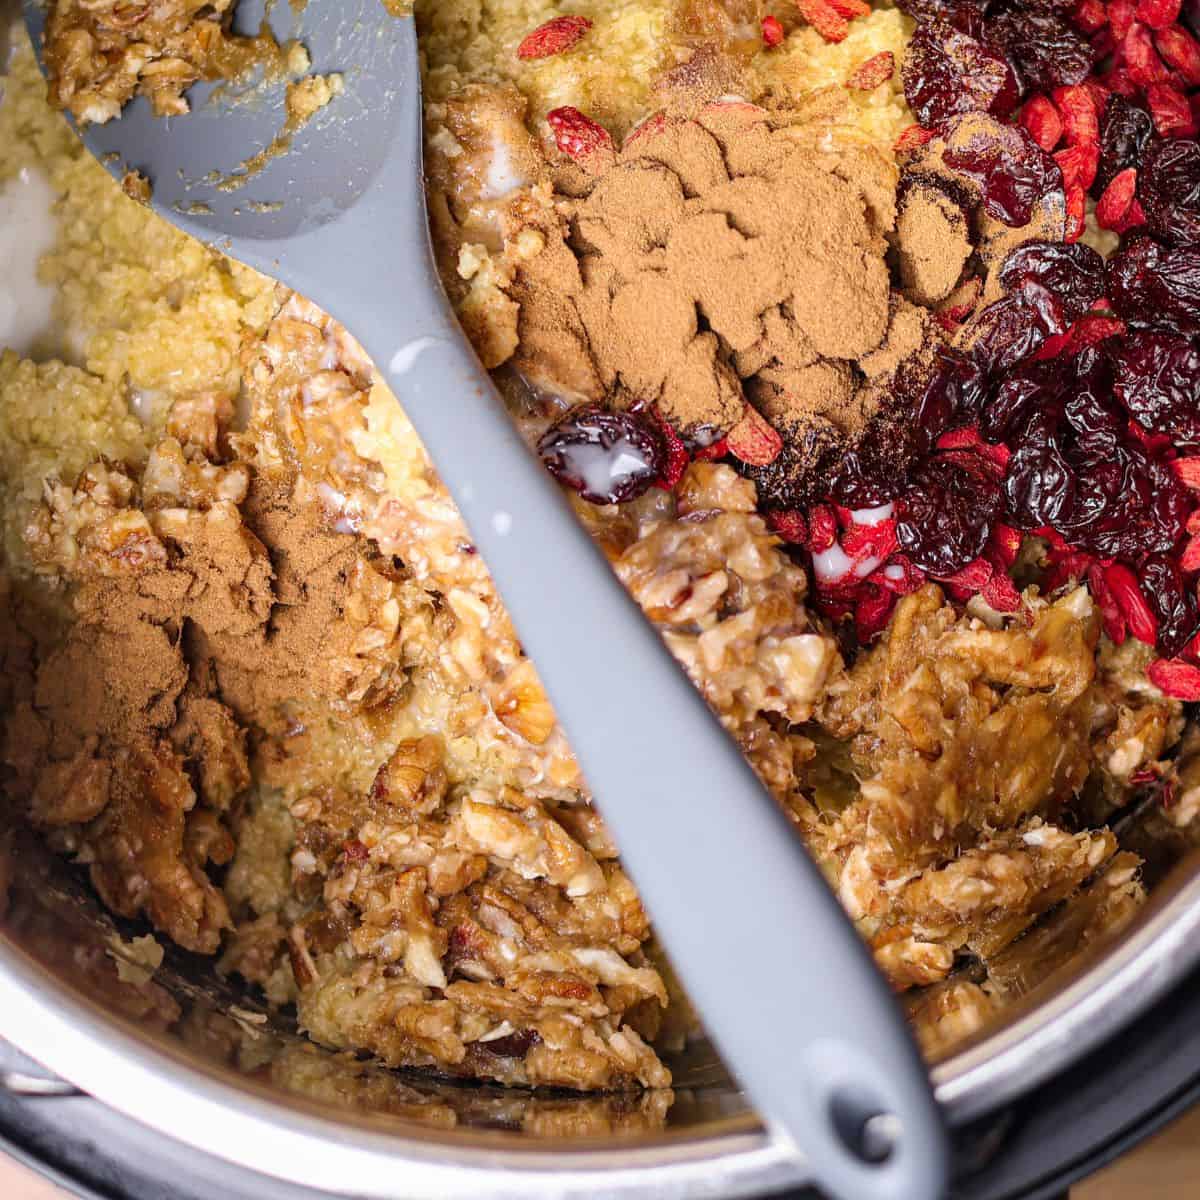 A close-up of an Instant Pot filled with cooked millet topped with a mound of cinnamon, bright red goji berries, dark dried cherries, and a mixing spatula.